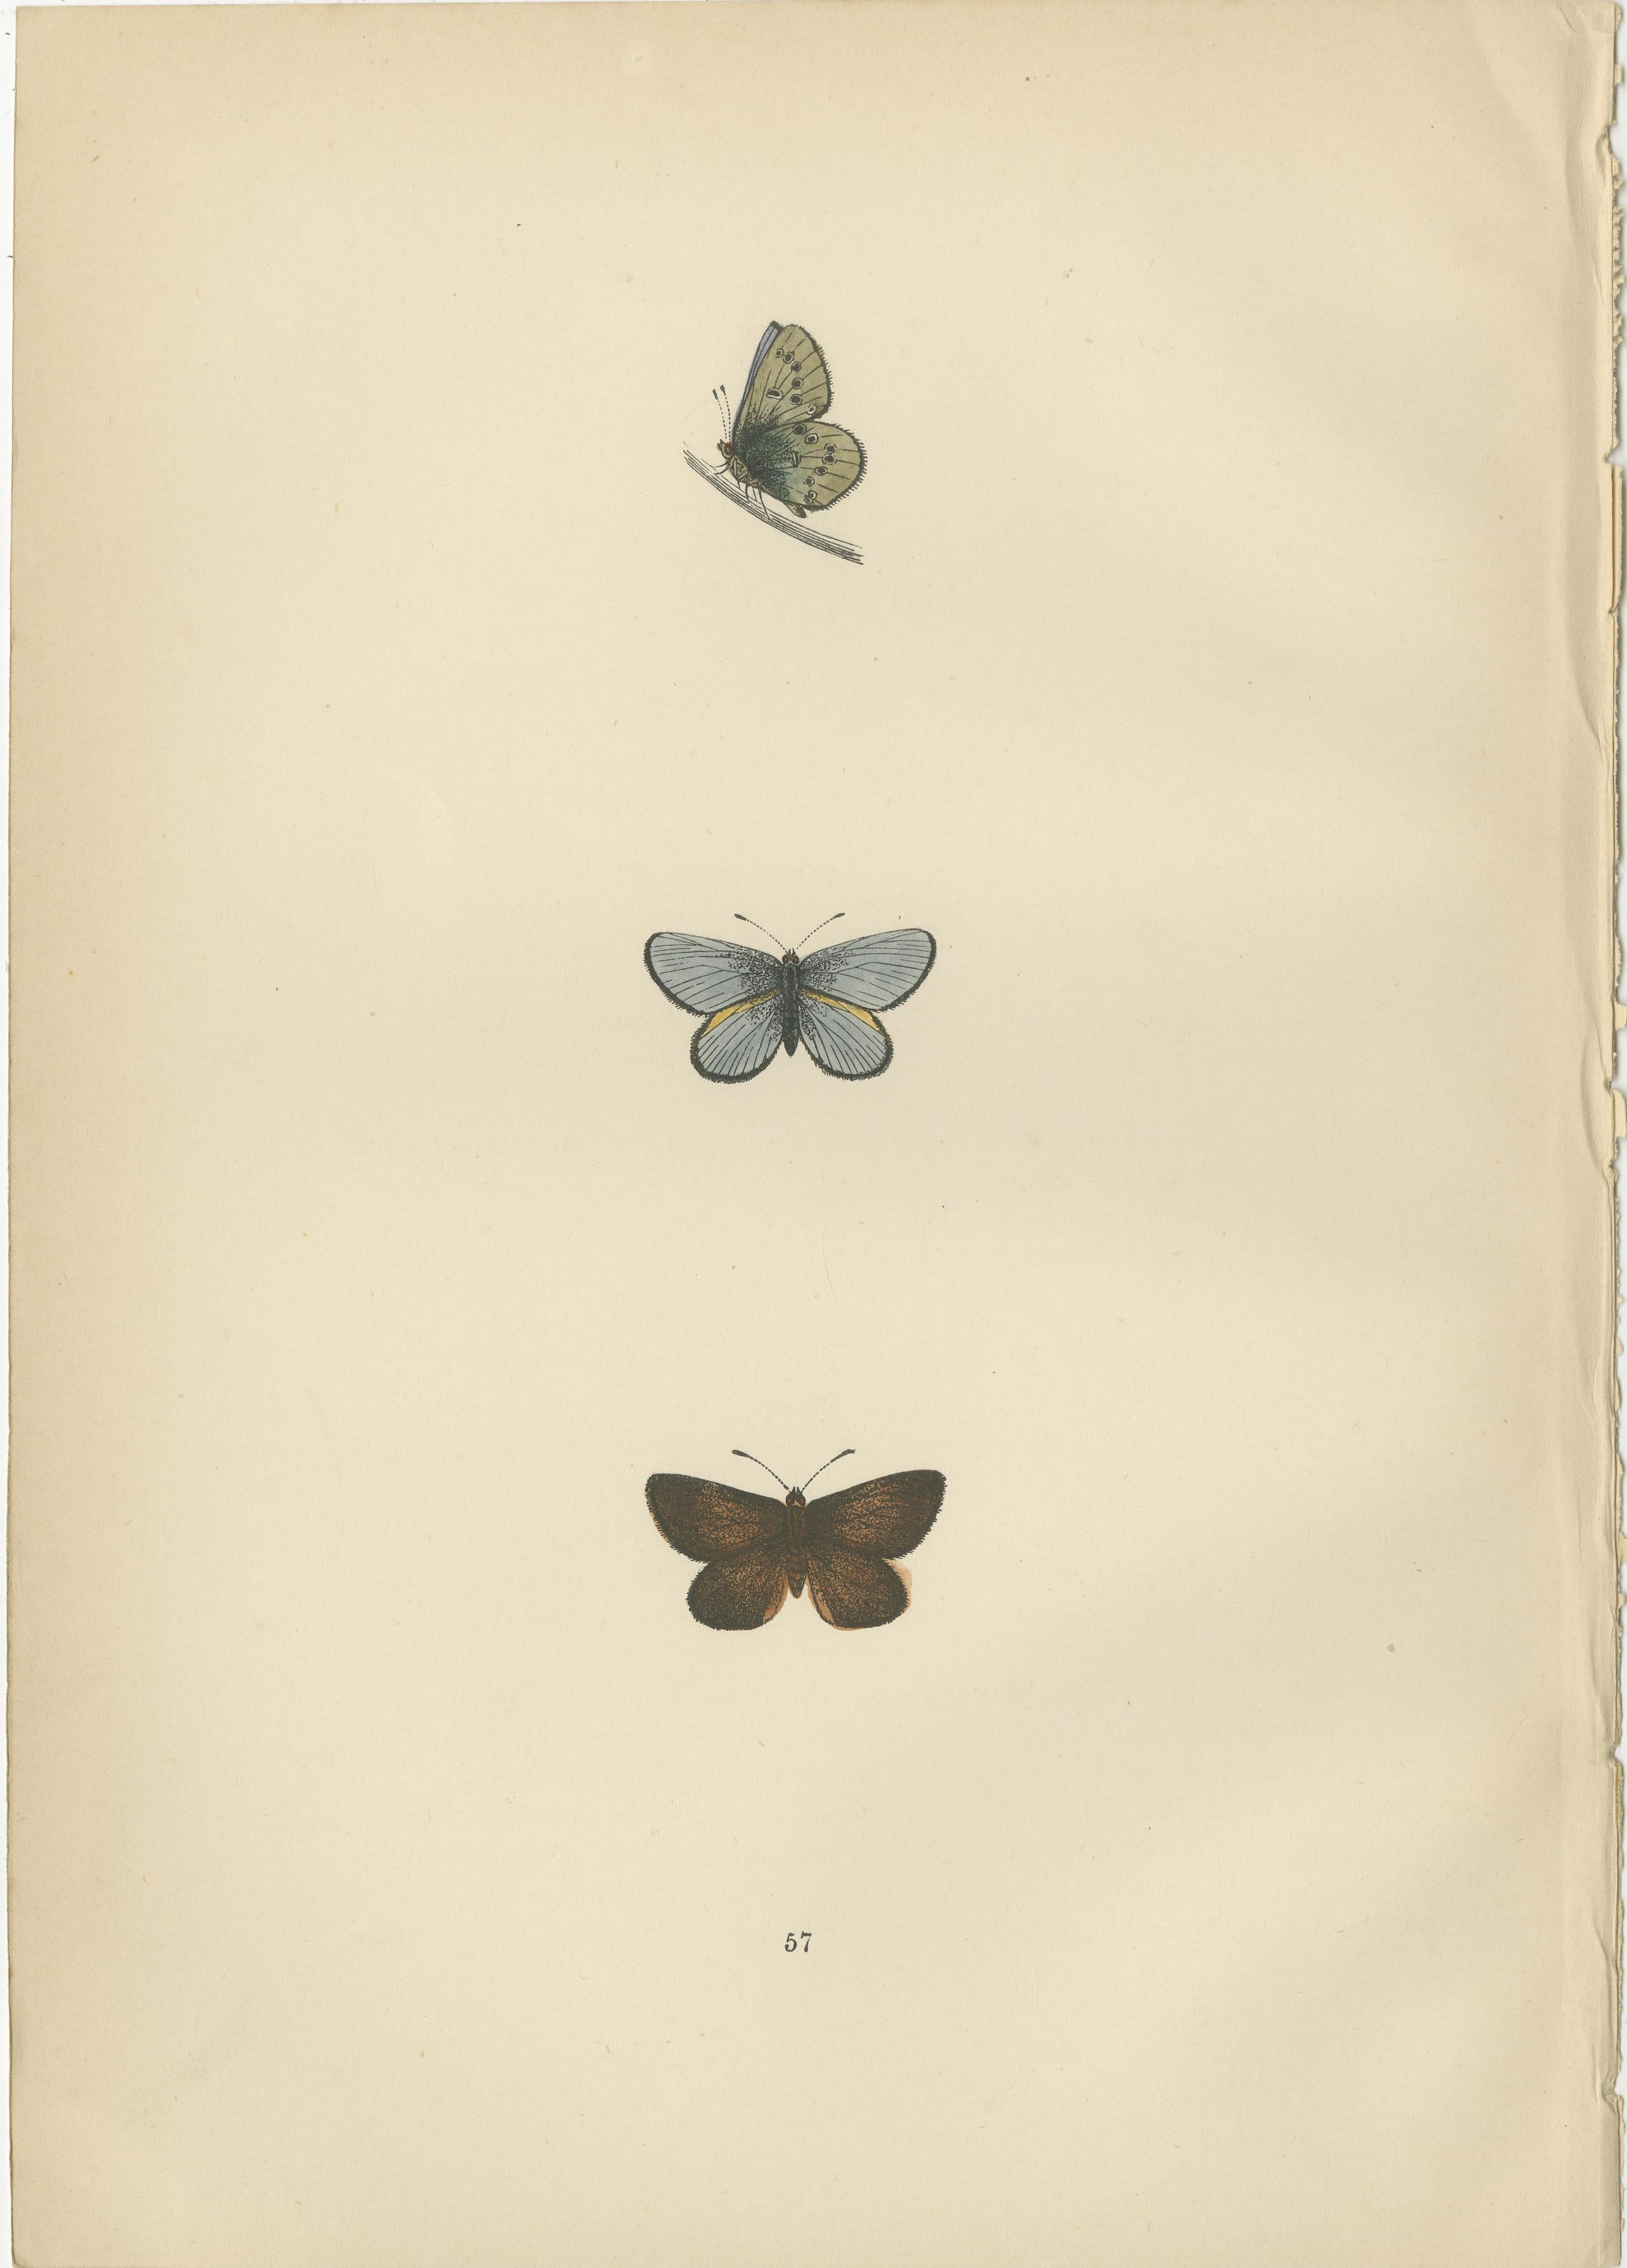 Late 19th Century Chromatic Splendor: The Copper, Argus, and Blue of Morris's 1890 Lepidoptera For Sale